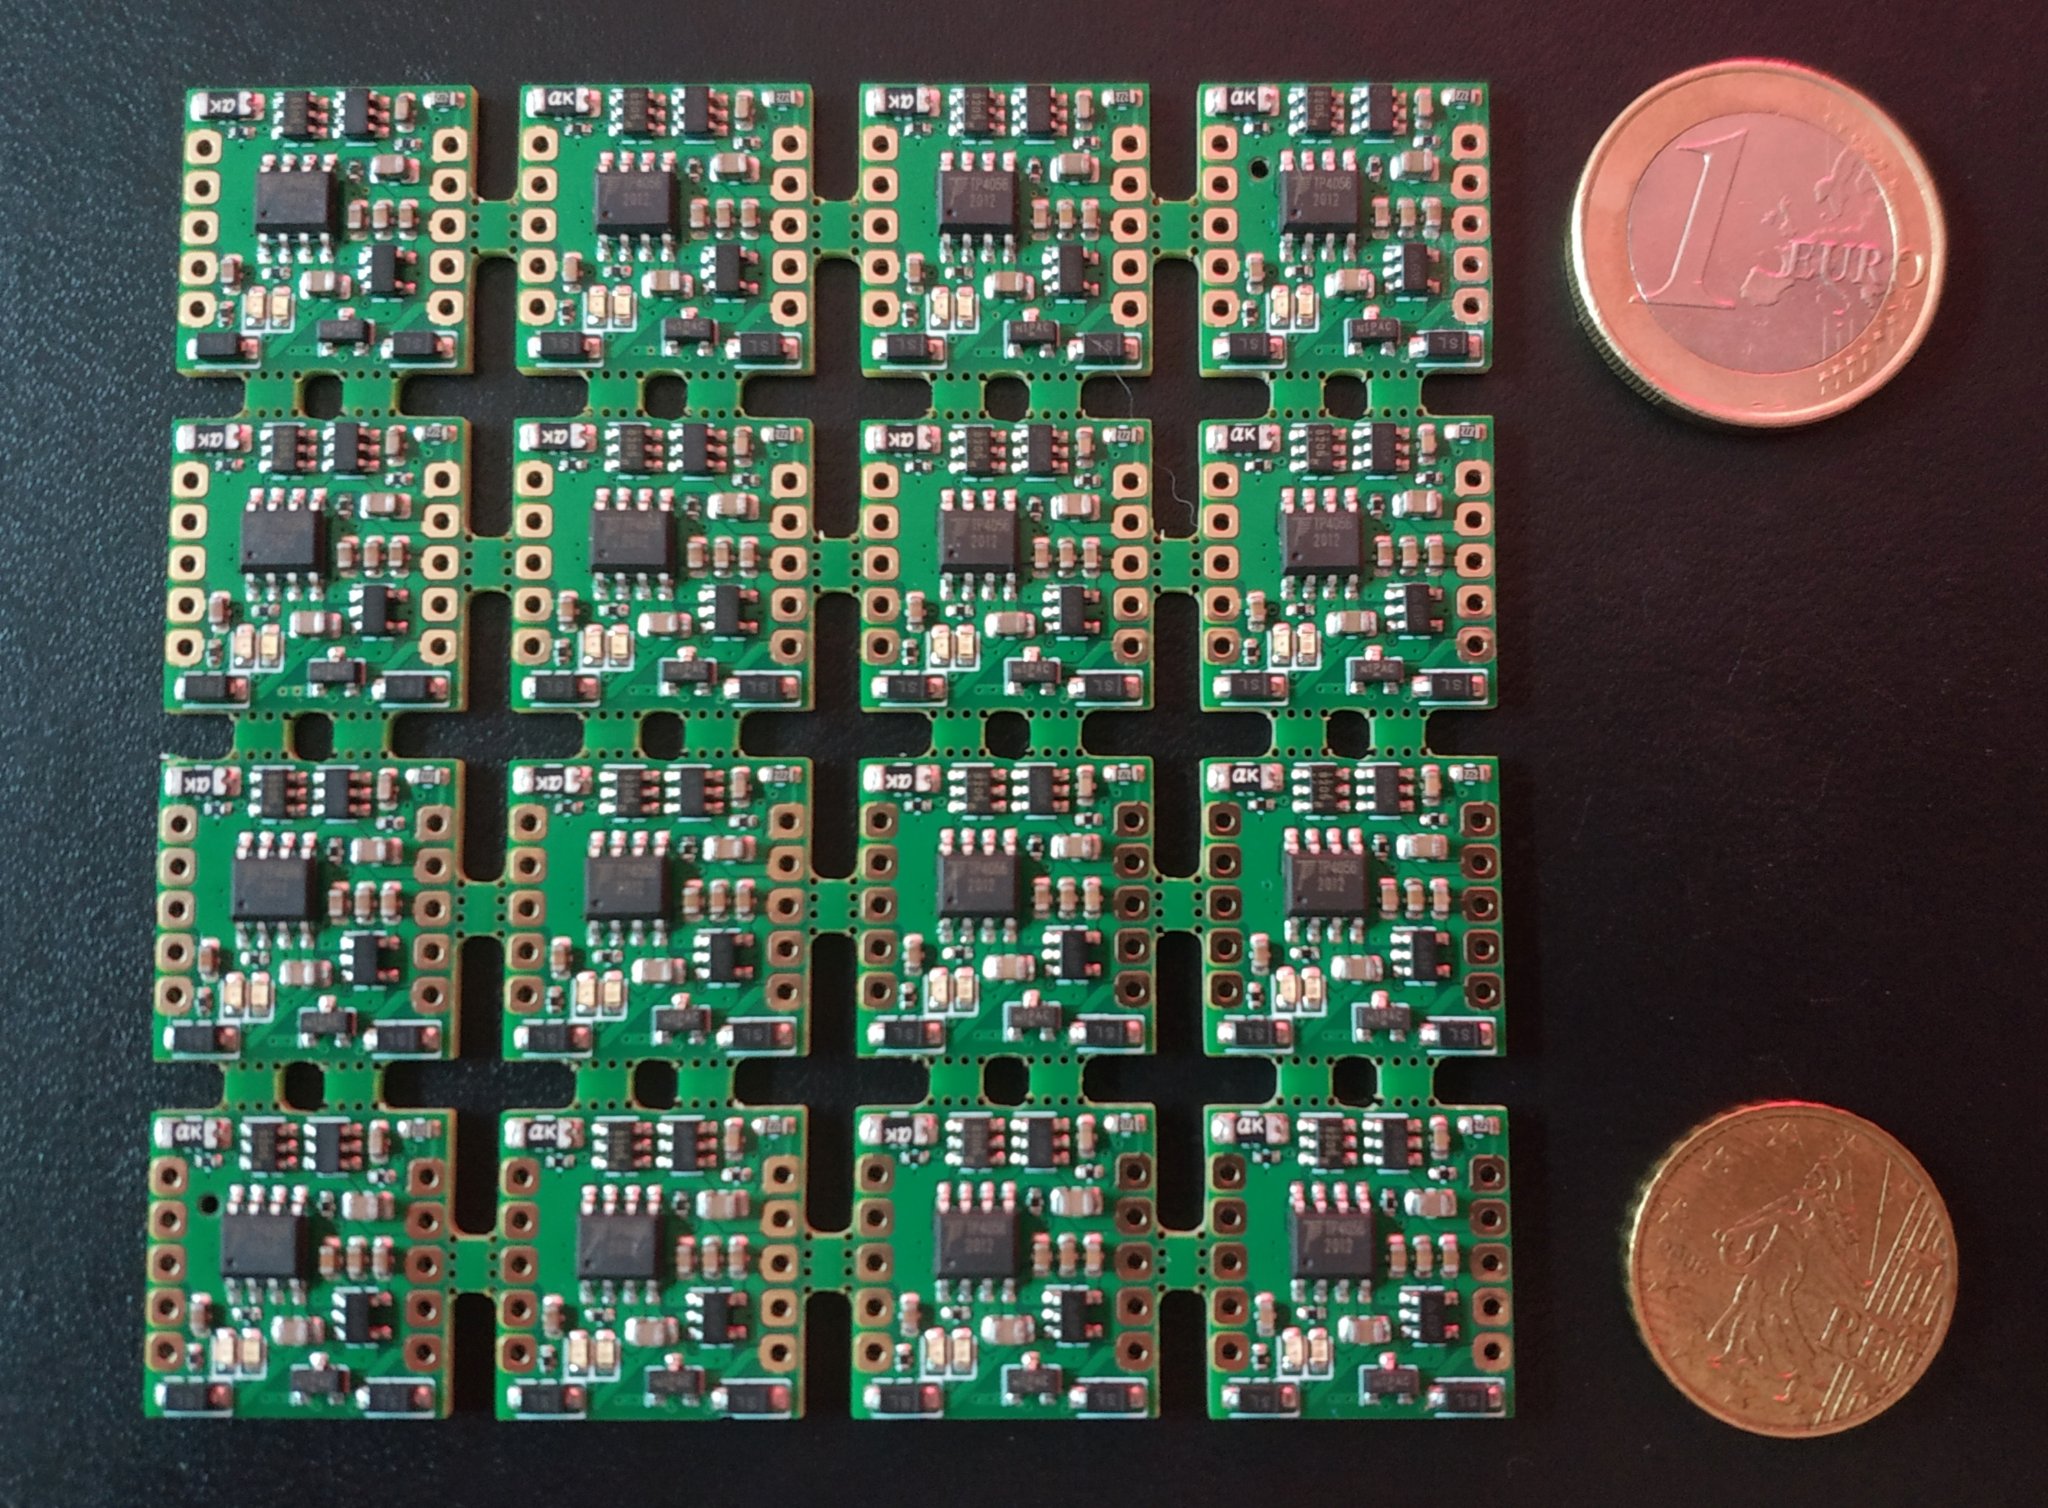 A panel of 16 circuit boards. Each is slightly smaller than a 1 Euro coin